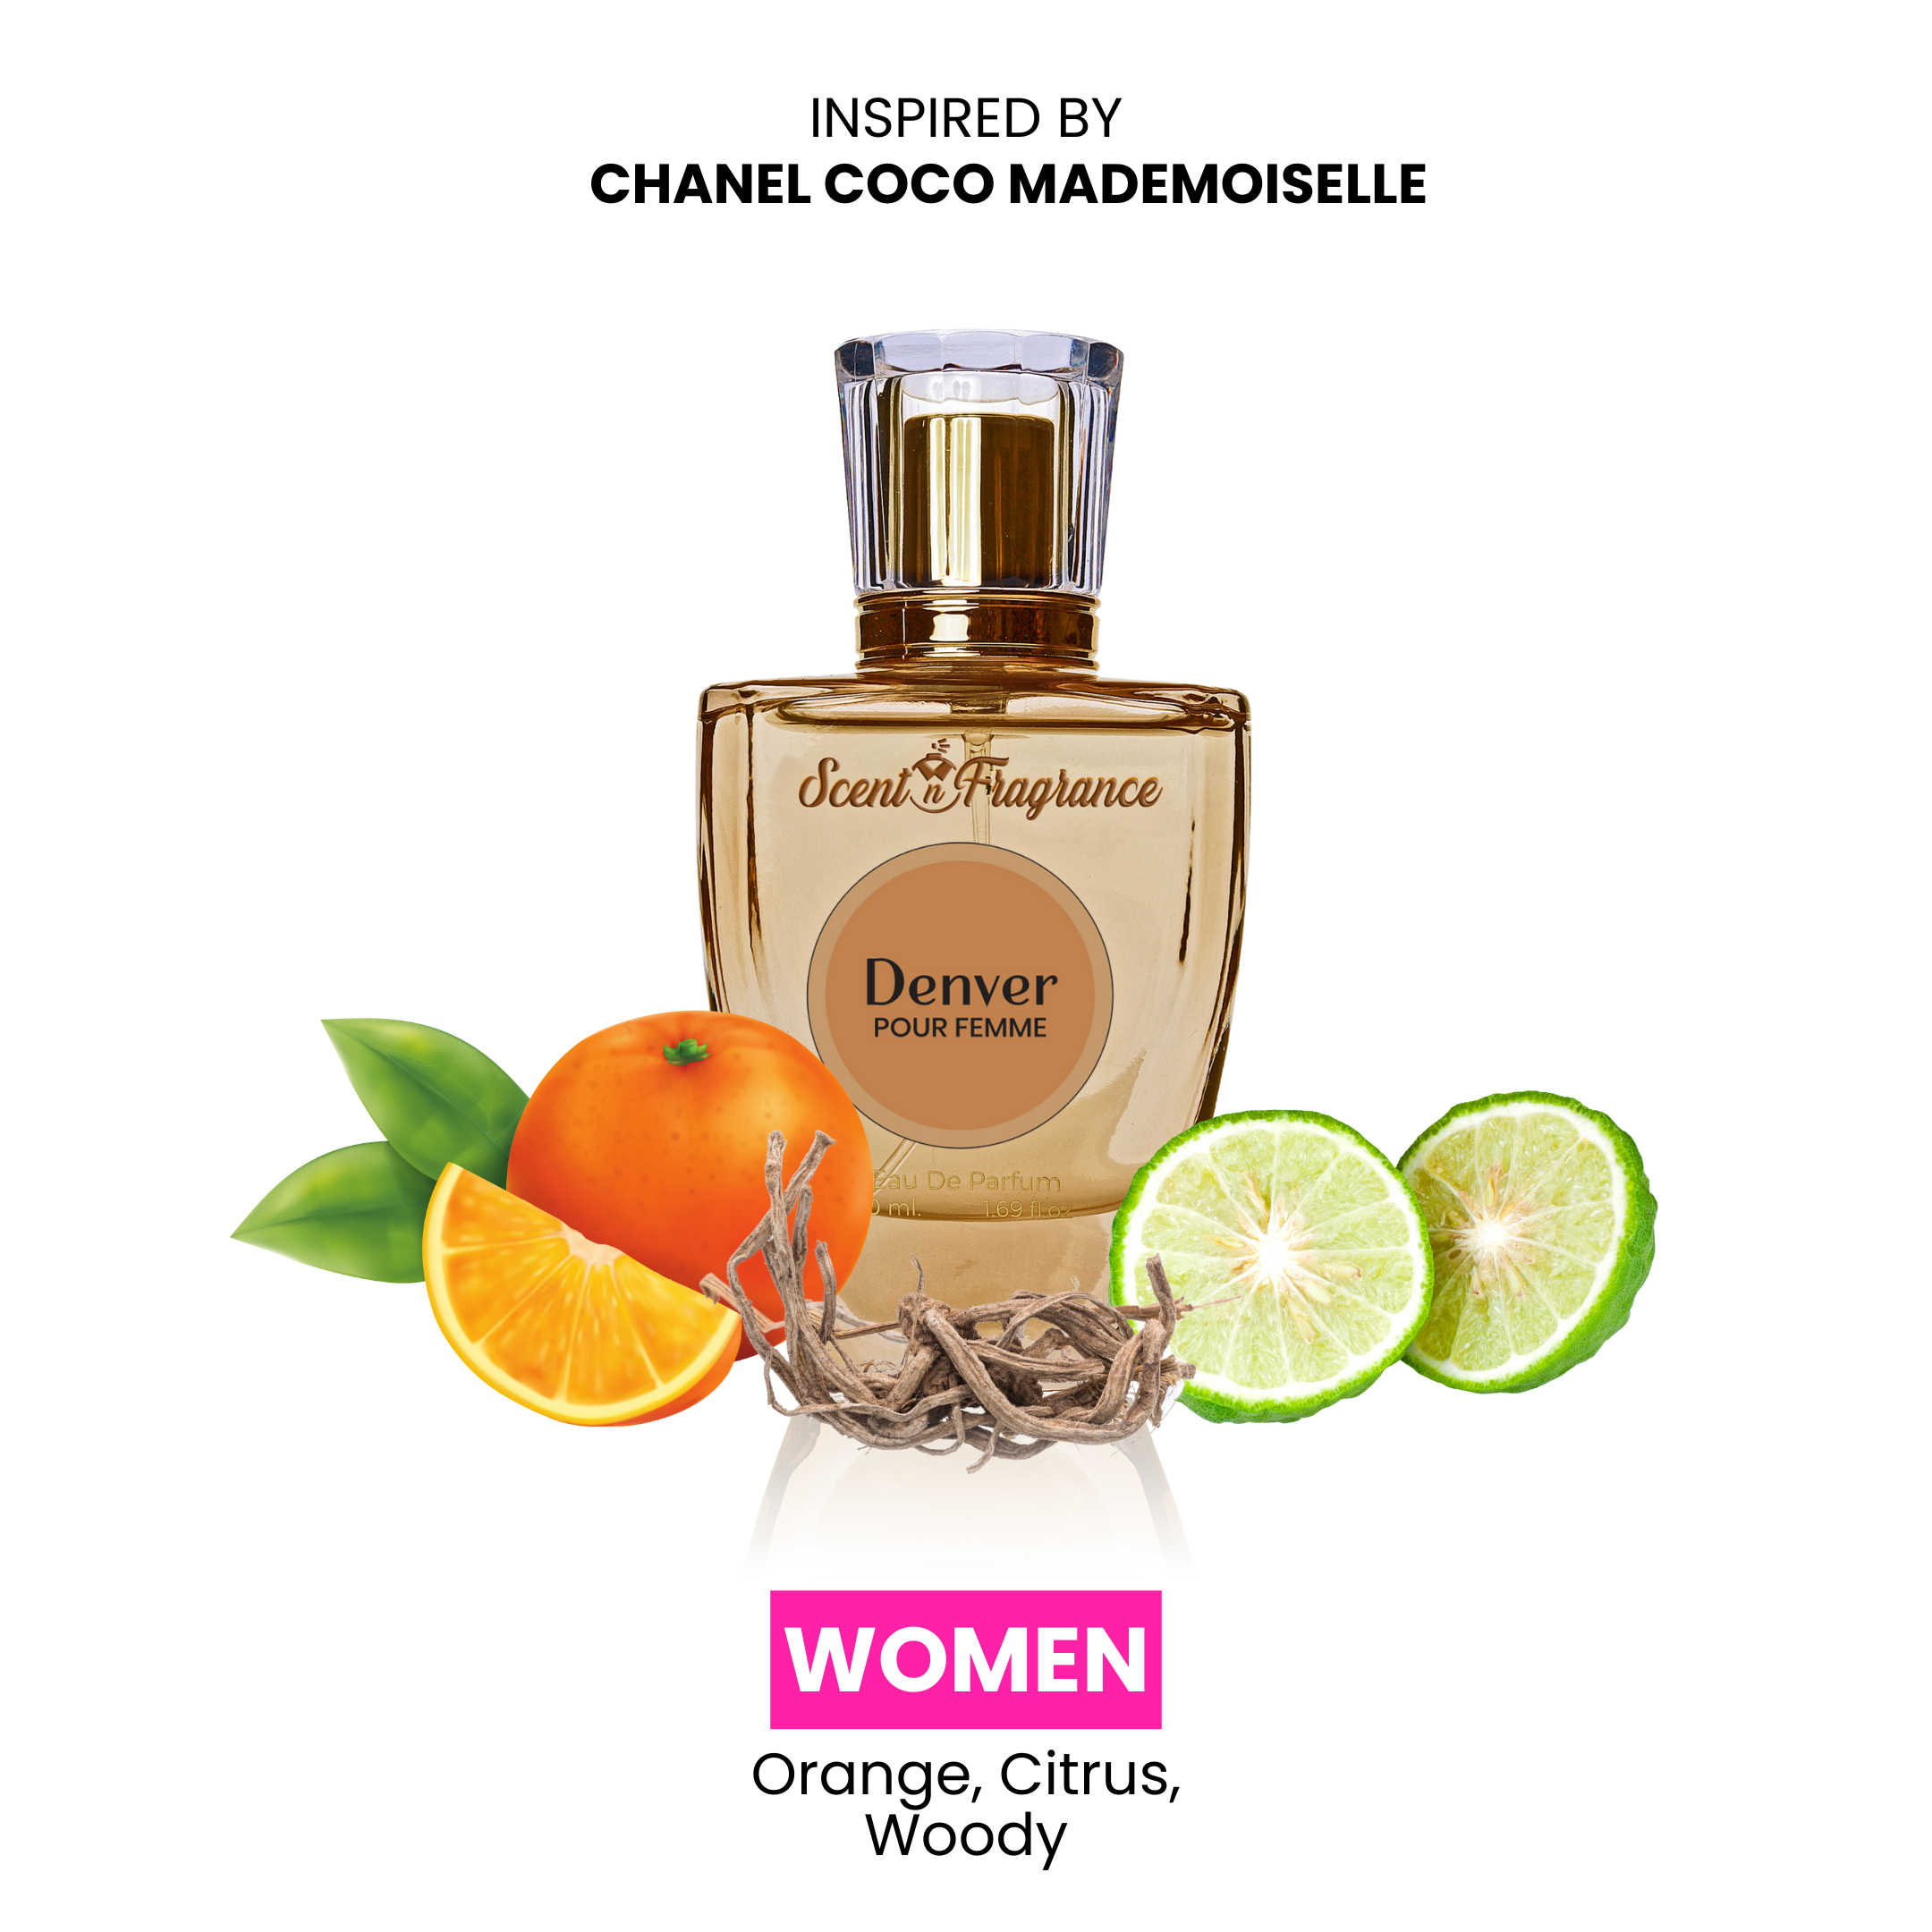 Denver - INSPIRED BY CHANEL COCO MADEMOISELLE by Scent N Fragrance